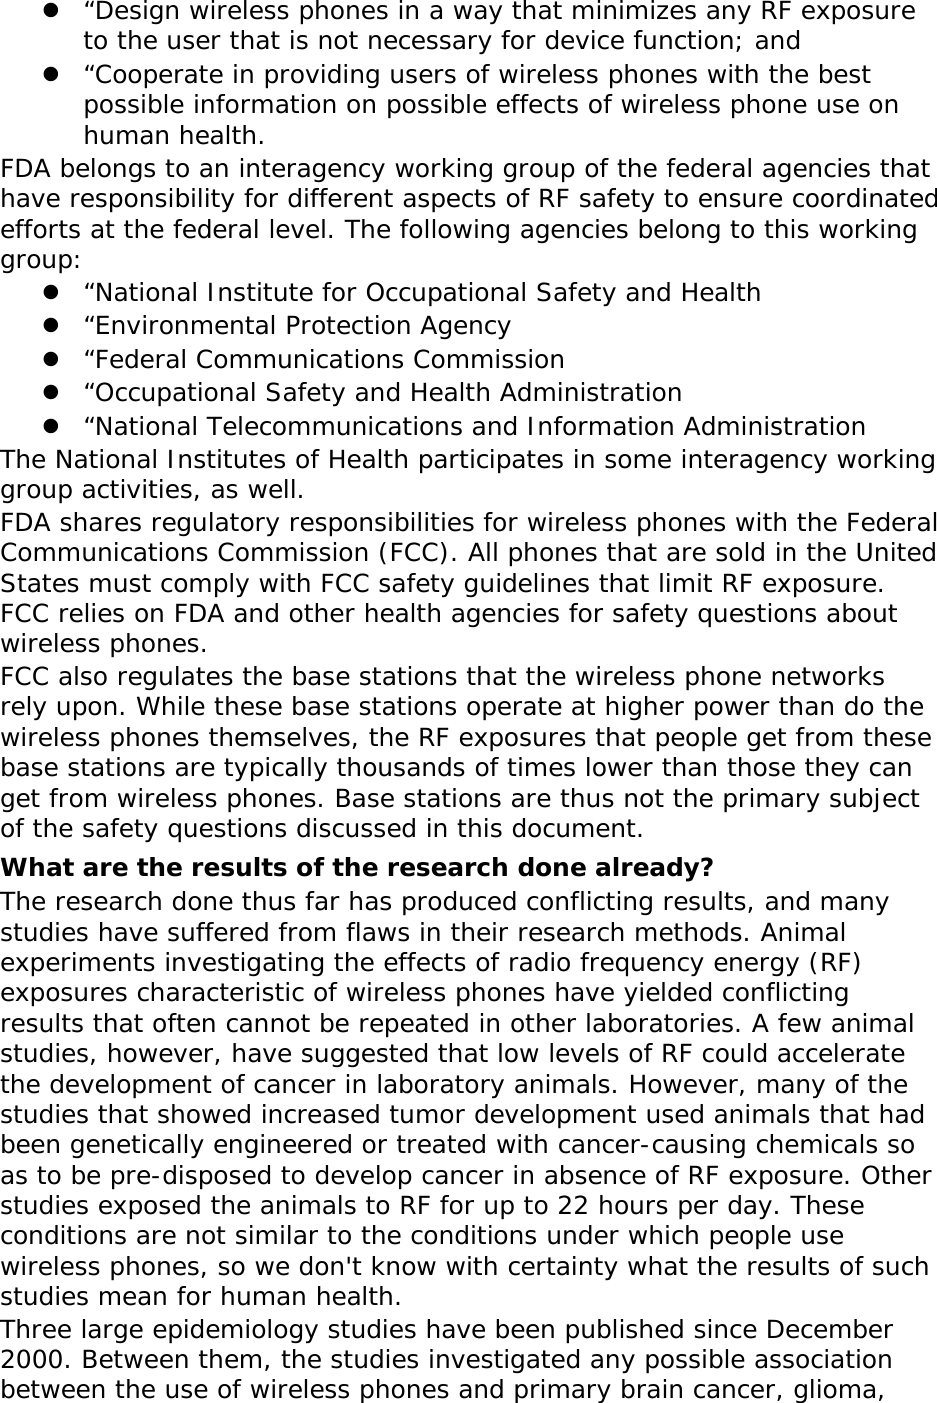 z “Design wireless phones in a way that minimizes any RF exposure to the user that is not necessary for device function; and z “Cooperate in providing users of wireless phones with the best possible information on possible effects of wireless phone use on human health. FDA belongs to an interagency working group of the federal agencies that have responsibility for different aspects of RF safety to ensure coordinated efforts at the federal level. The following agencies belong to this working group: z “National Institute for Occupational Safety and Health z “Environmental Protection Agency z “Federal Communications Commission z “Occupational Safety and Health Administration z “National Telecommunications and Information Administration The National Institutes of Health participates in some interagency working group activities, as well. FDA shares regulatory responsibilities for wireless phones with the Federal Communications Commission (FCC). All phones that are sold in the United States must comply with FCC safety guidelines that limit RF exposure. FCC relies on FDA and other health agencies for safety questions about wireless phones. FCC also regulates the base stations that the wireless phone networks rely upon. While these base stations operate at higher power than do the wireless phones themselves, the RF exposures that people get from these base stations are typically thousands of times lower than those they can get from wireless phones. Base stations are thus not the primary subject of the safety questions discussed in this document. What are the results of the research done already? The research done thus far has produced conflicting results, and many studies have suffered from flaws in their research methods. Animal experiments investigating the effects of radio frequency energy (RF) exposures characteristic of wireless phones have yielded conflicting results that often cannot be repeated in other laboratories. A few animal studies, however, have suggested that low levels of RF could accelerate the development of cancer in laboratory animals. However, many of the studies that showed increased tumor development used animals that had been genetically engineered or treated with cancer-causing chemicals so as to be pre-disposed to develop cancer in absence of RF exposure. Other studies exposed the animals to RF for up to 22 hours per day. These conditions are not similar to the conditions under which people use wireless phones, so we don&apos;t know with certainty what the results of such studies mean for human health. Three large epidemiology studies have been published since December 2000. Between them, the studies investigated any possible association between the use of wireless phones and primary brain cancer, glioma, 